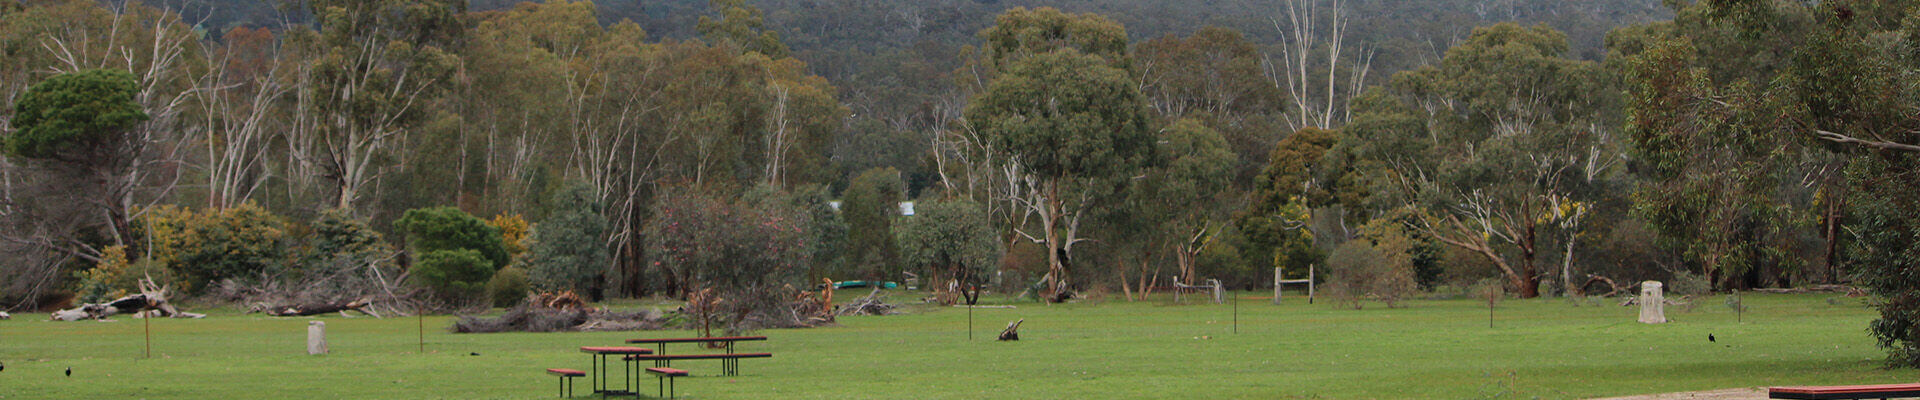 The Happy Wanderer Holiday Resort - The Grampians National Park